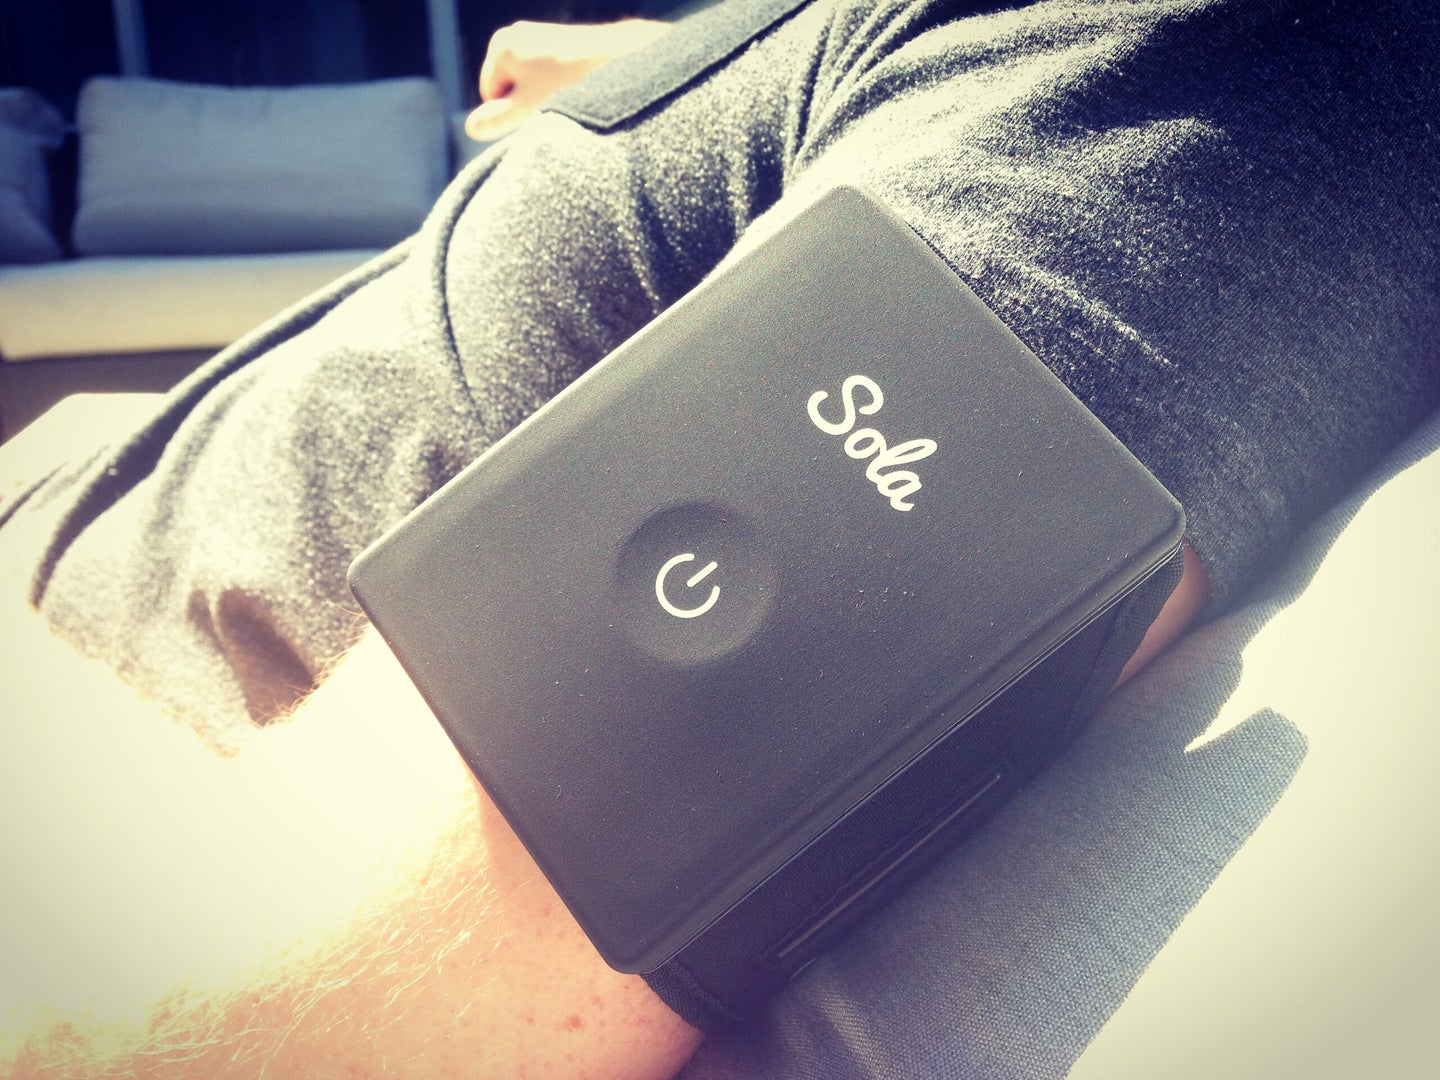 Sola Is Your Own Personal Heater